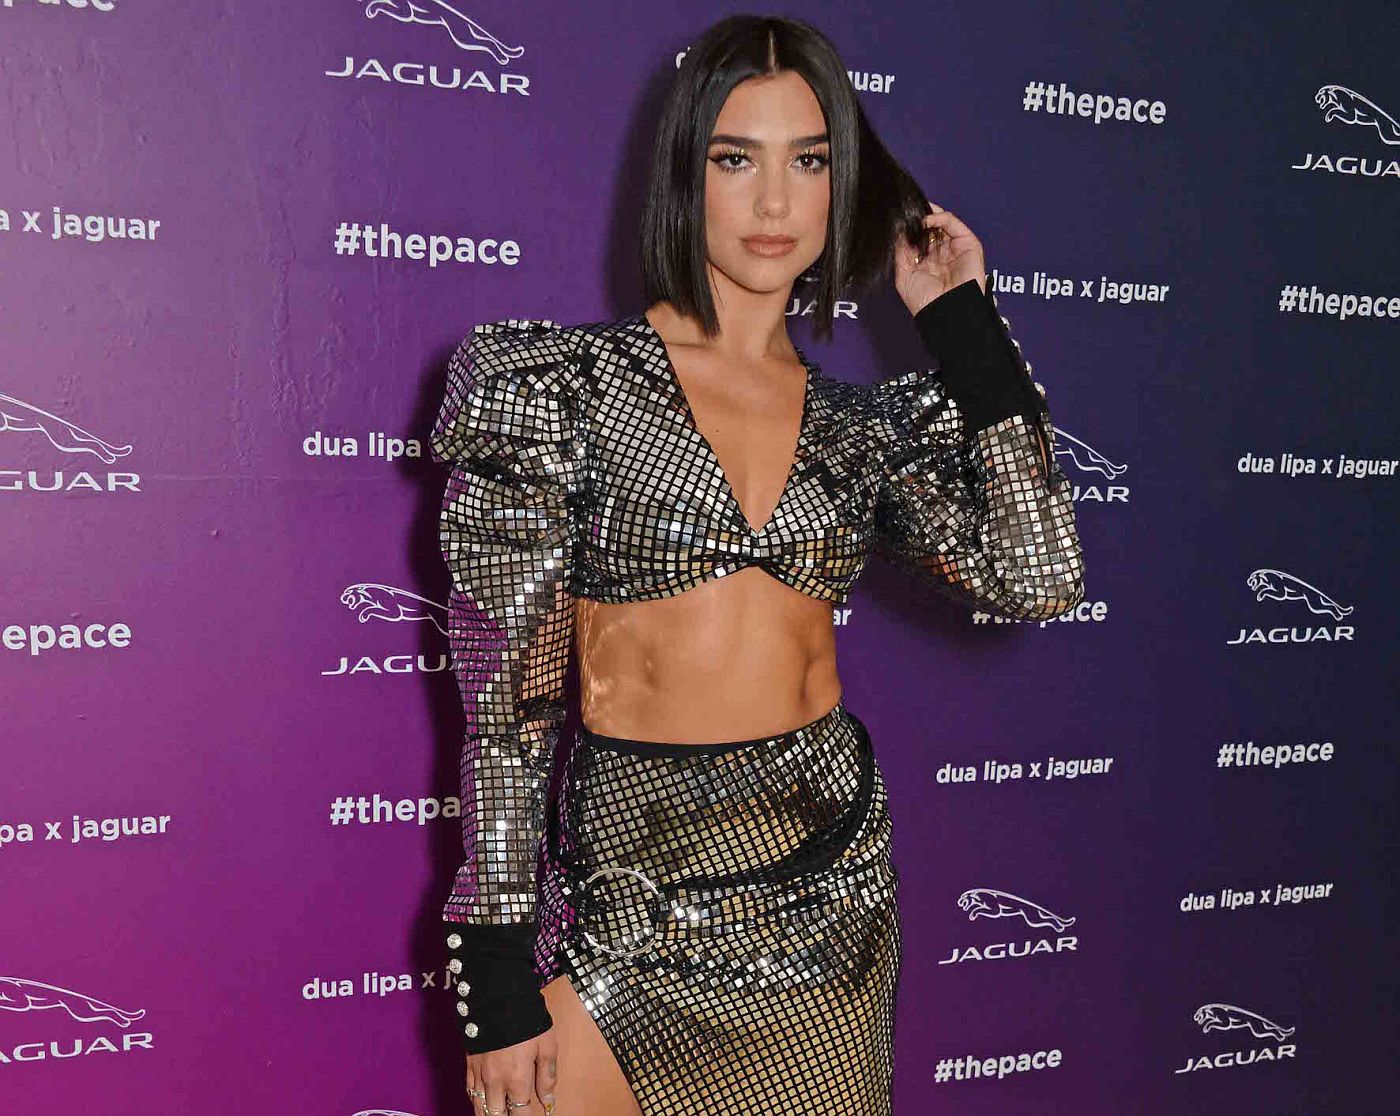 Dua Lipa And Jaguar Create Music Track Every Fan Can Remix And Call Their Own